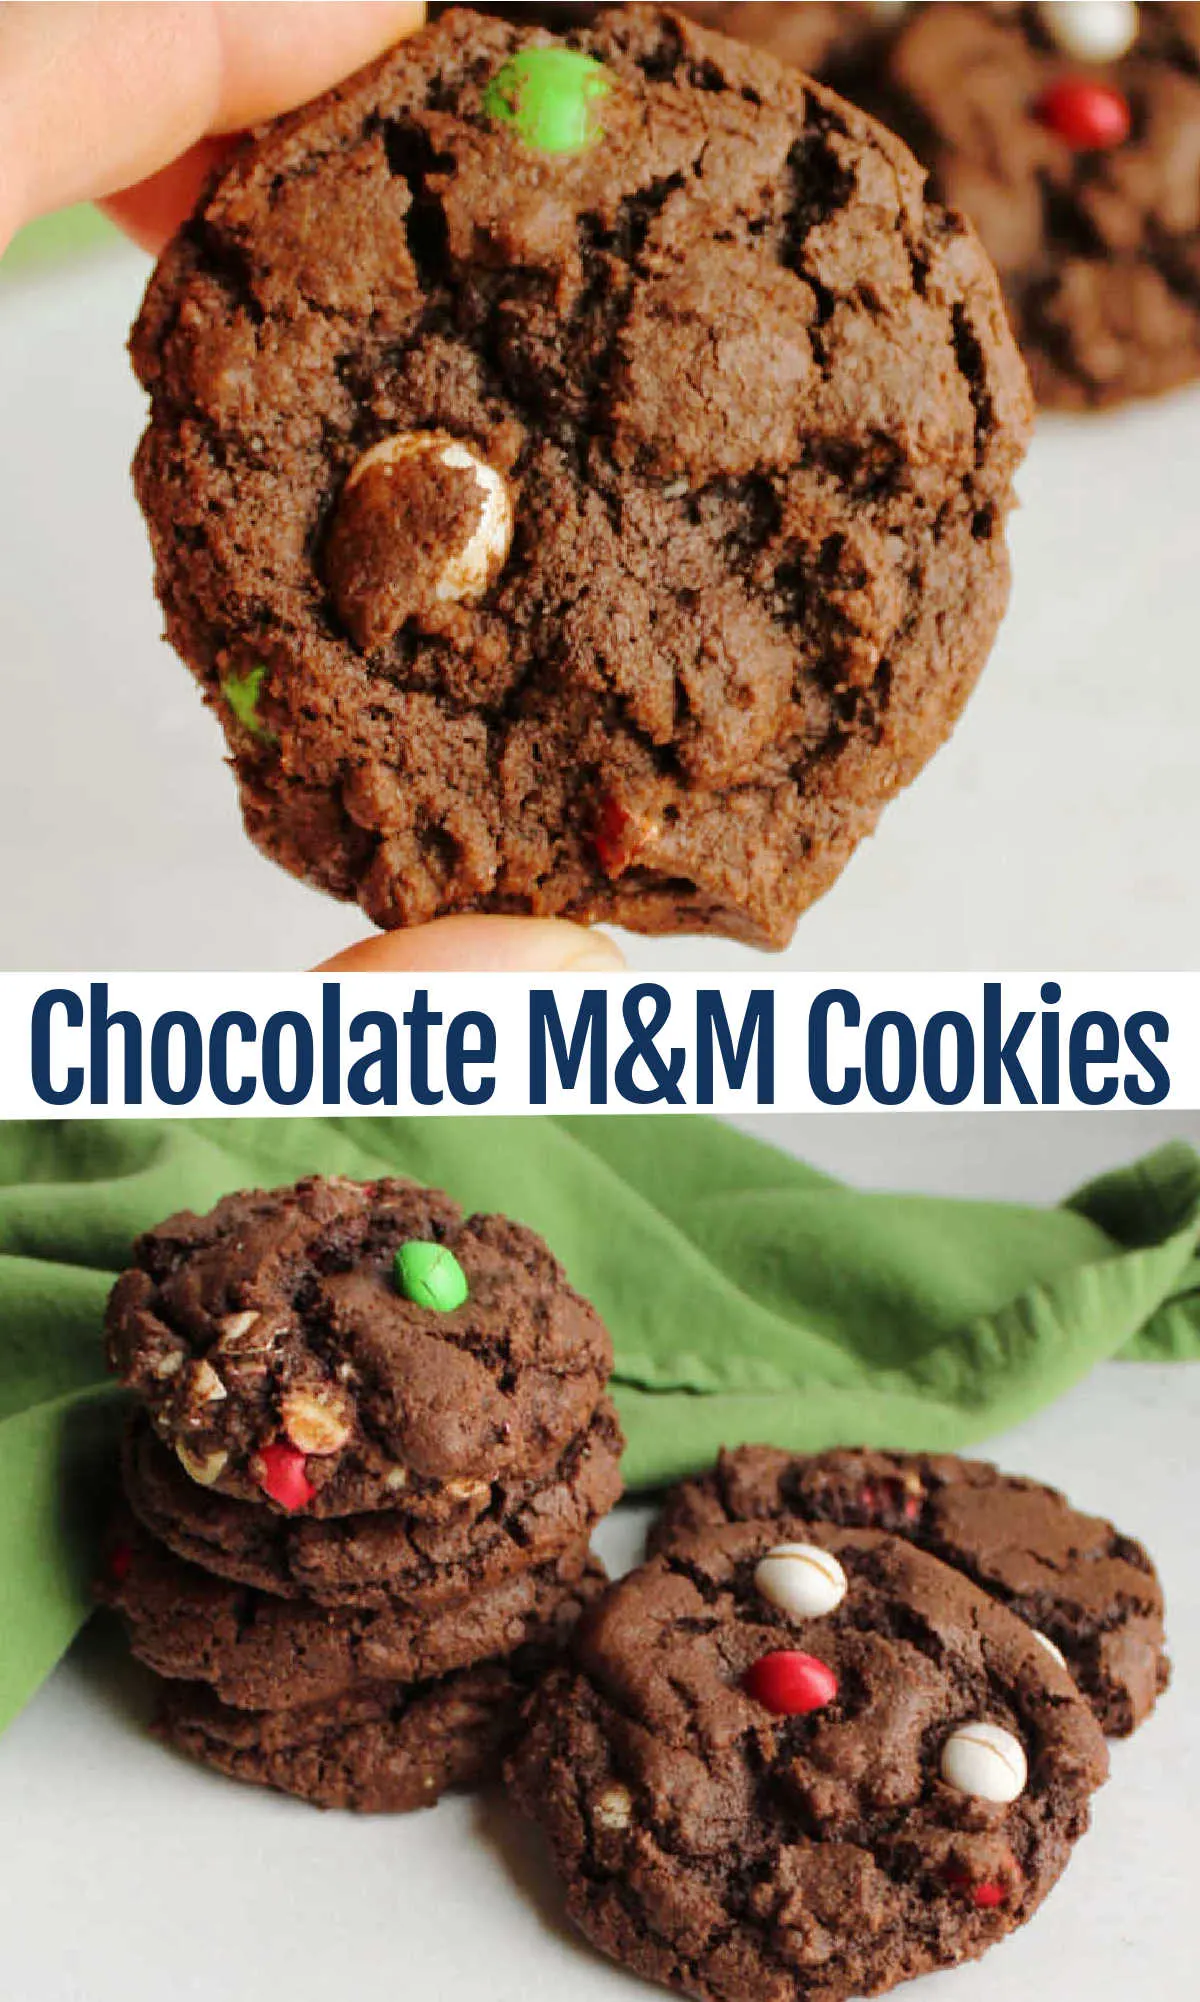 Chocolate fans rejoice, rich chocolate cookies loaded with M&Ms are a perfect way to celebrate our favorite flavor.  These cookies come together quick and easily.  They are a great way to use up some extra candy and are perfect for a party.  They would also be a fun addition to your holiday baking. No matter the reason, they are going to be delicious!